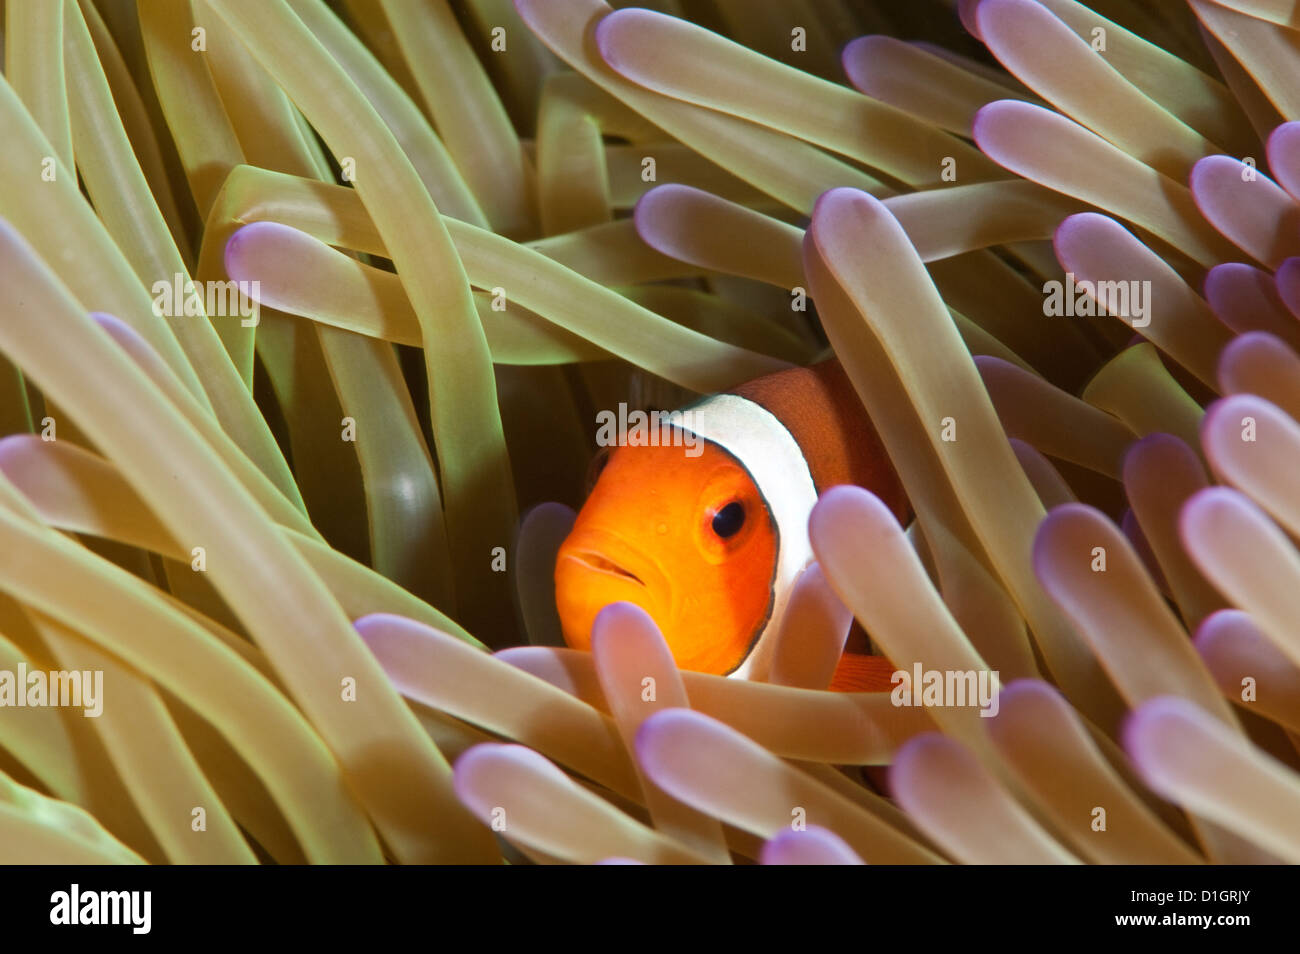 Clarks anemonefish (Amphiprion clarkii), Sulawesi, Indonesia, Southeast Asia, Asia Stock Photo